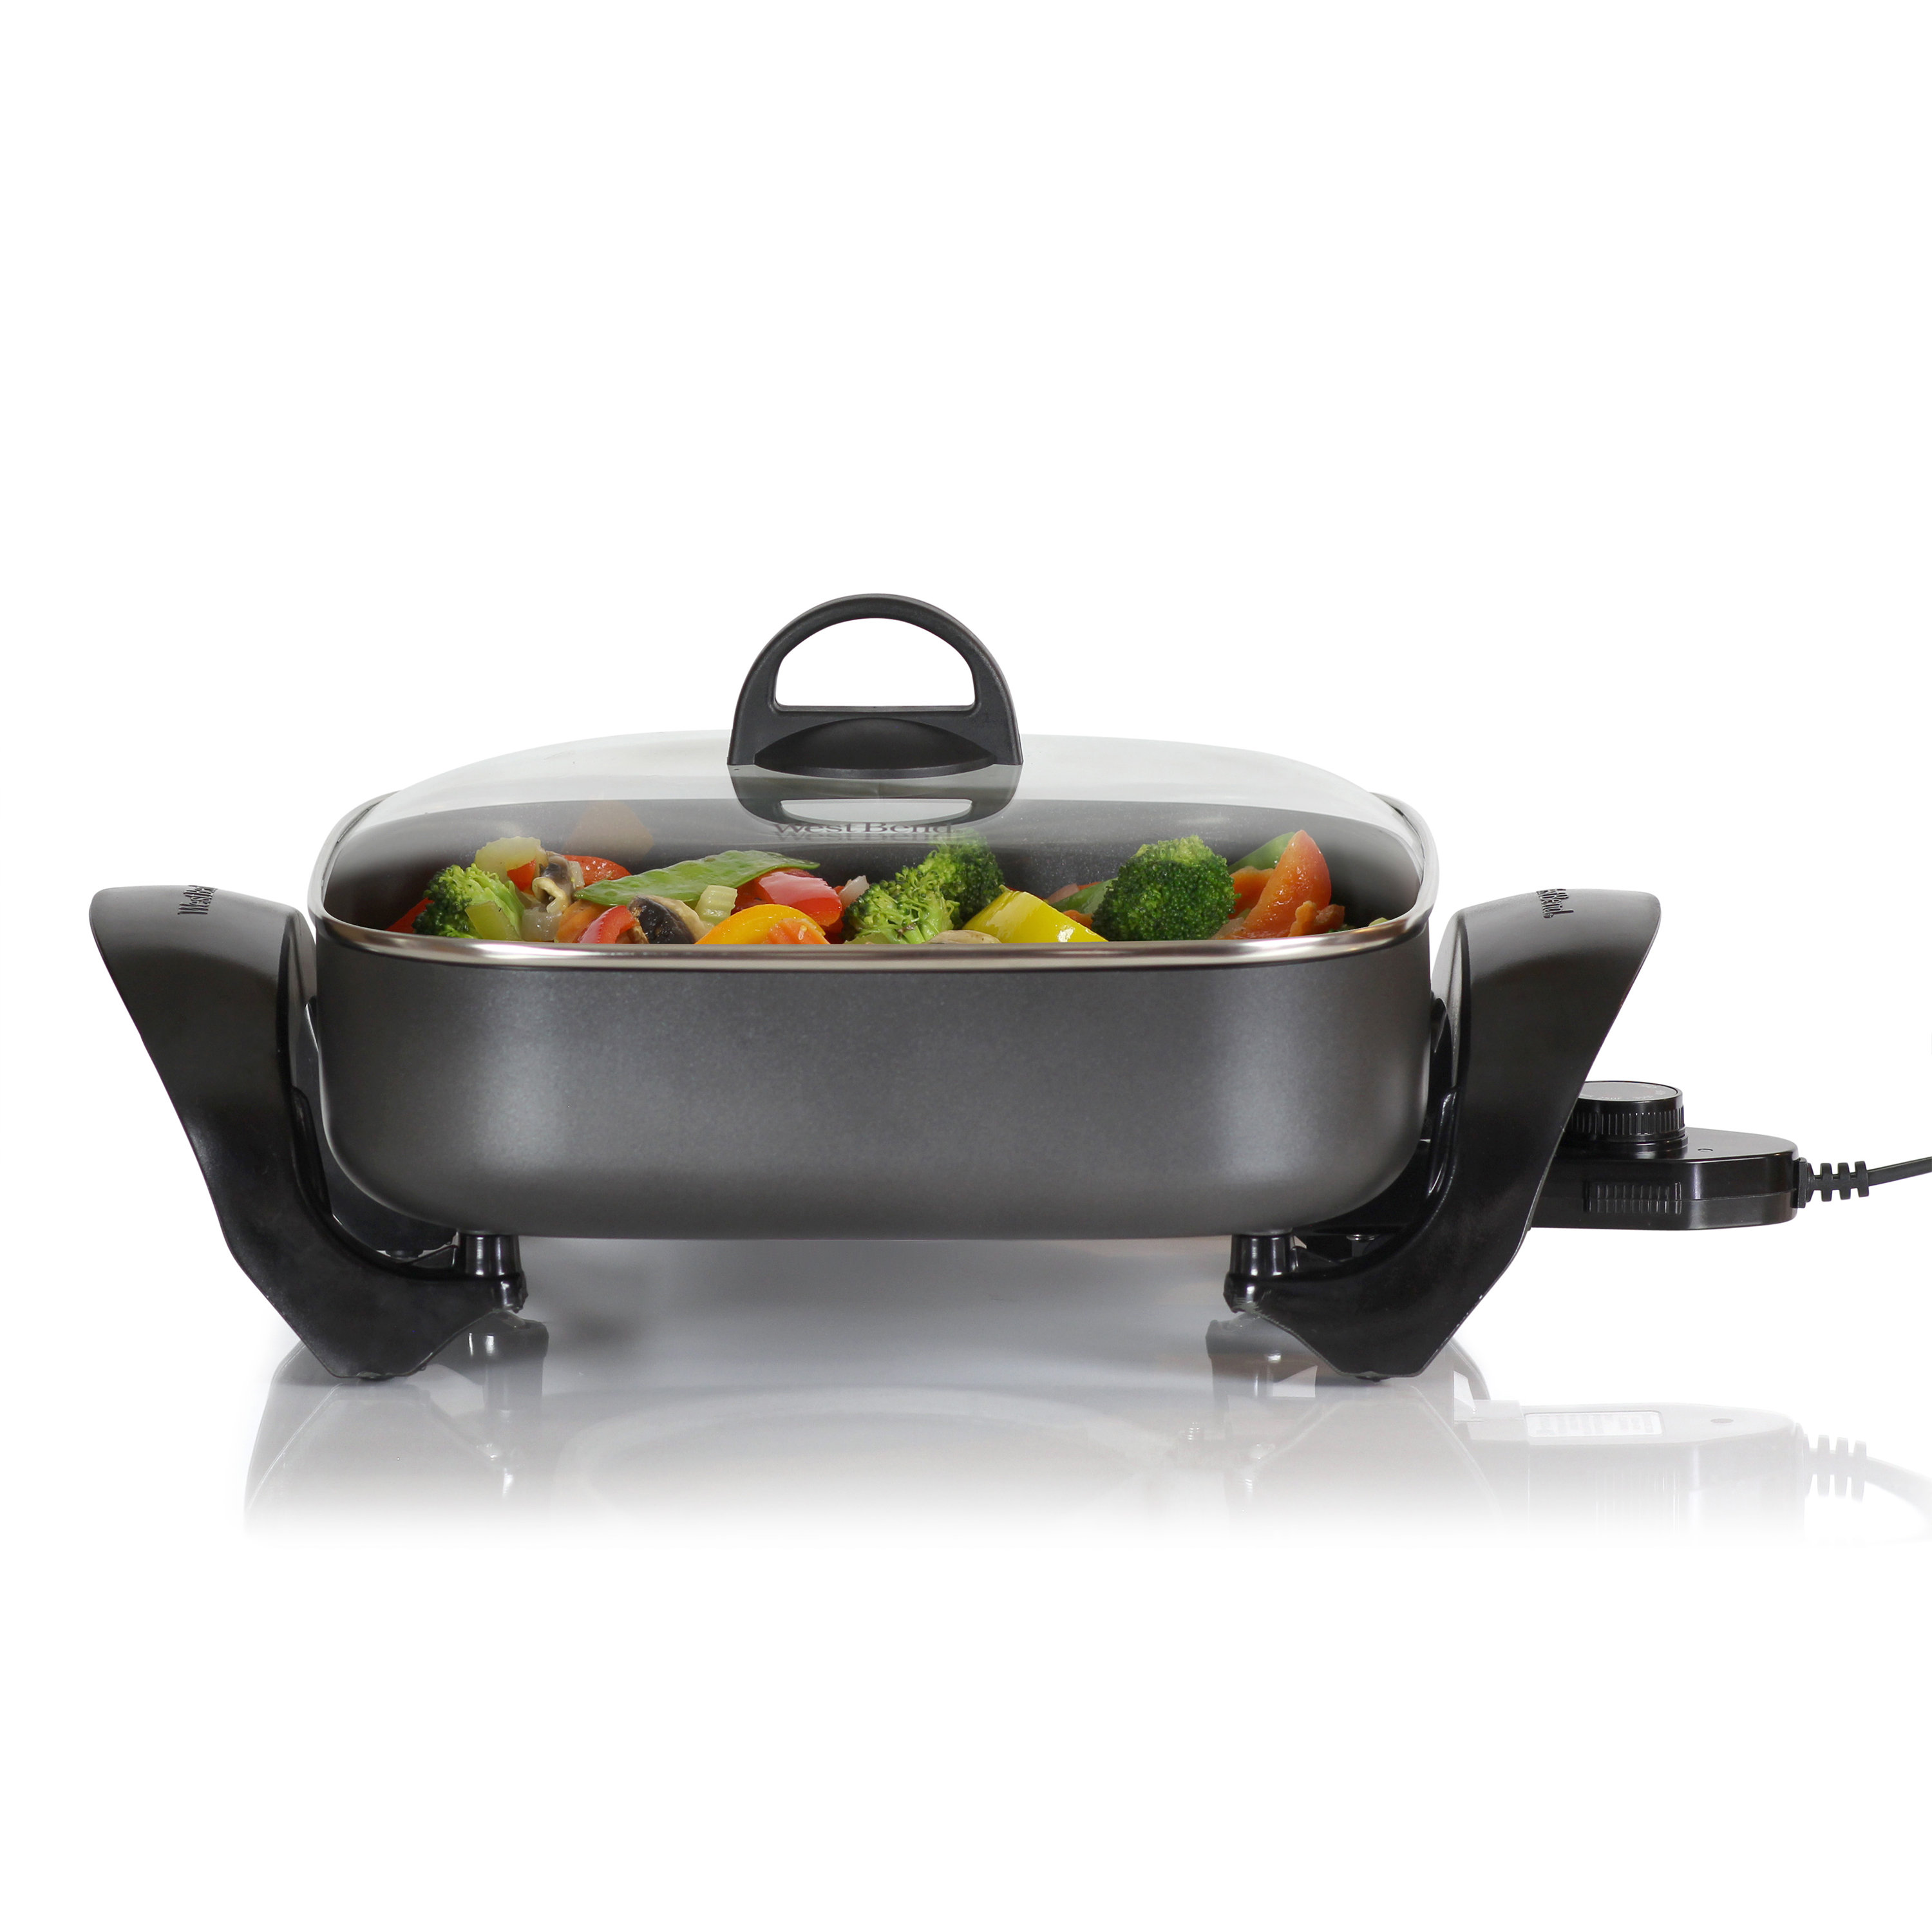 West Bend 12-Inch Electric Skillet with Non-Stick Coating & Reviews